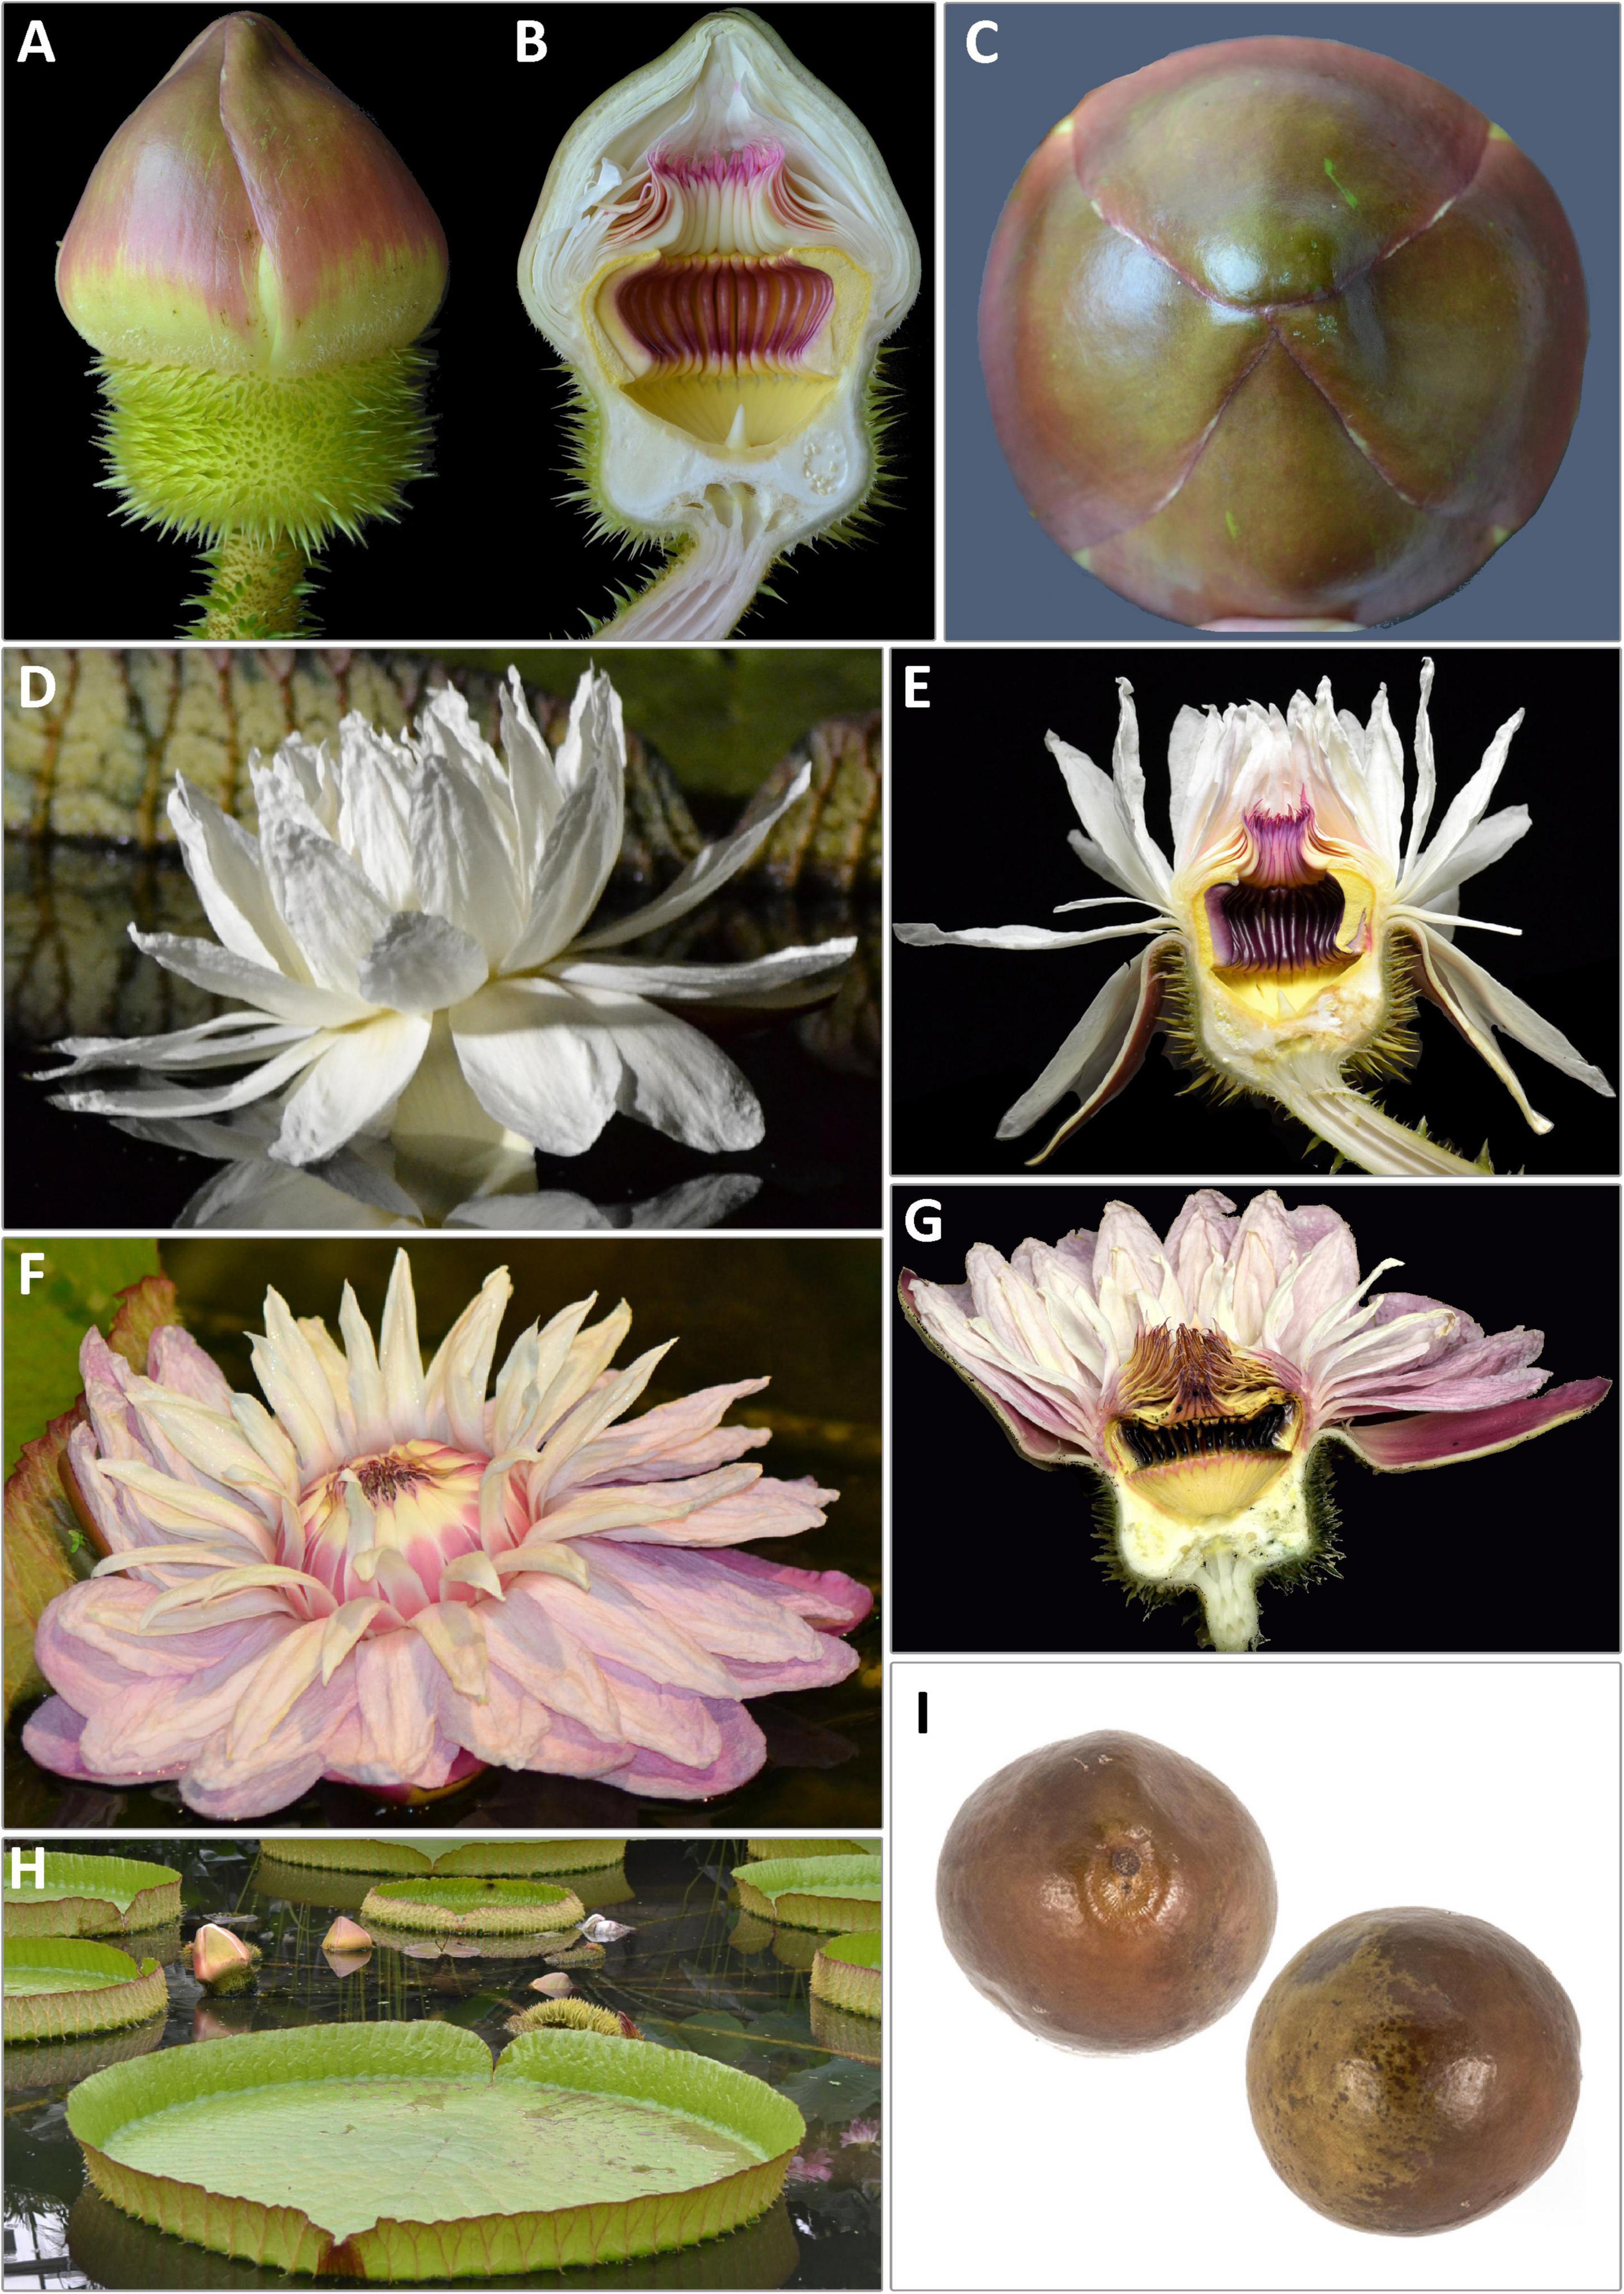 Frontiers  Revised Species Delimitation in the Giant Water Lily Genus  Victoria (Nymphaeaceae) Confirms a New Species and Has Implications for Its  Conservation